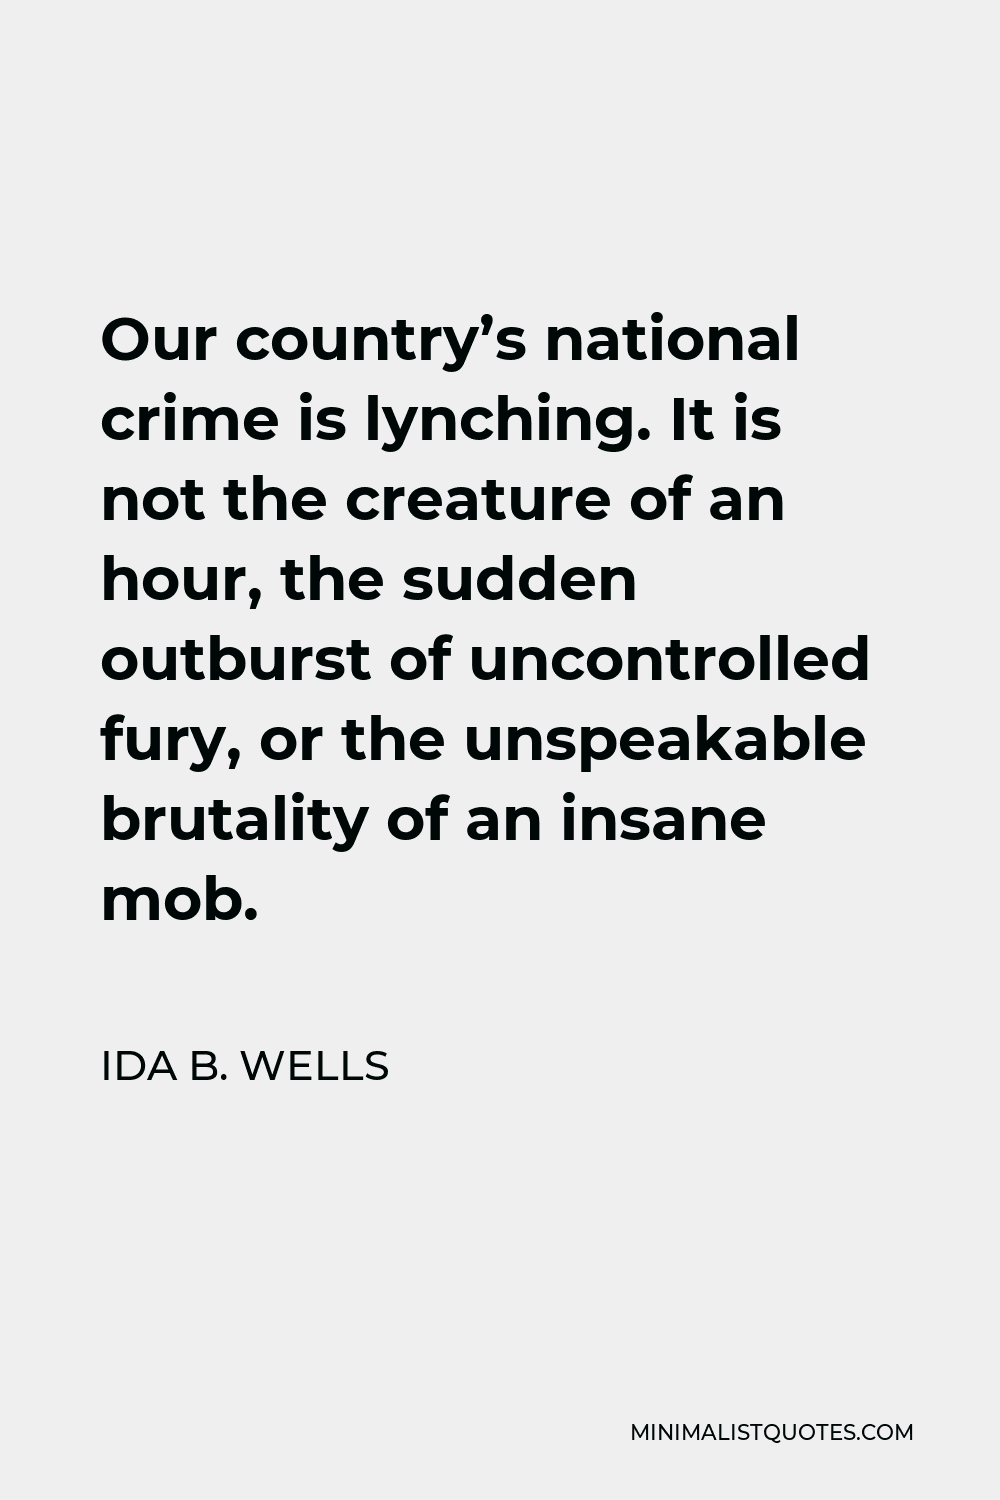 Ida B. Wells Quote - Our country’s national crime is lynching. It is not the creature of an hour, the sudden outburst of uncontrolled fury, or the unspeakable brutality of an insane mob.